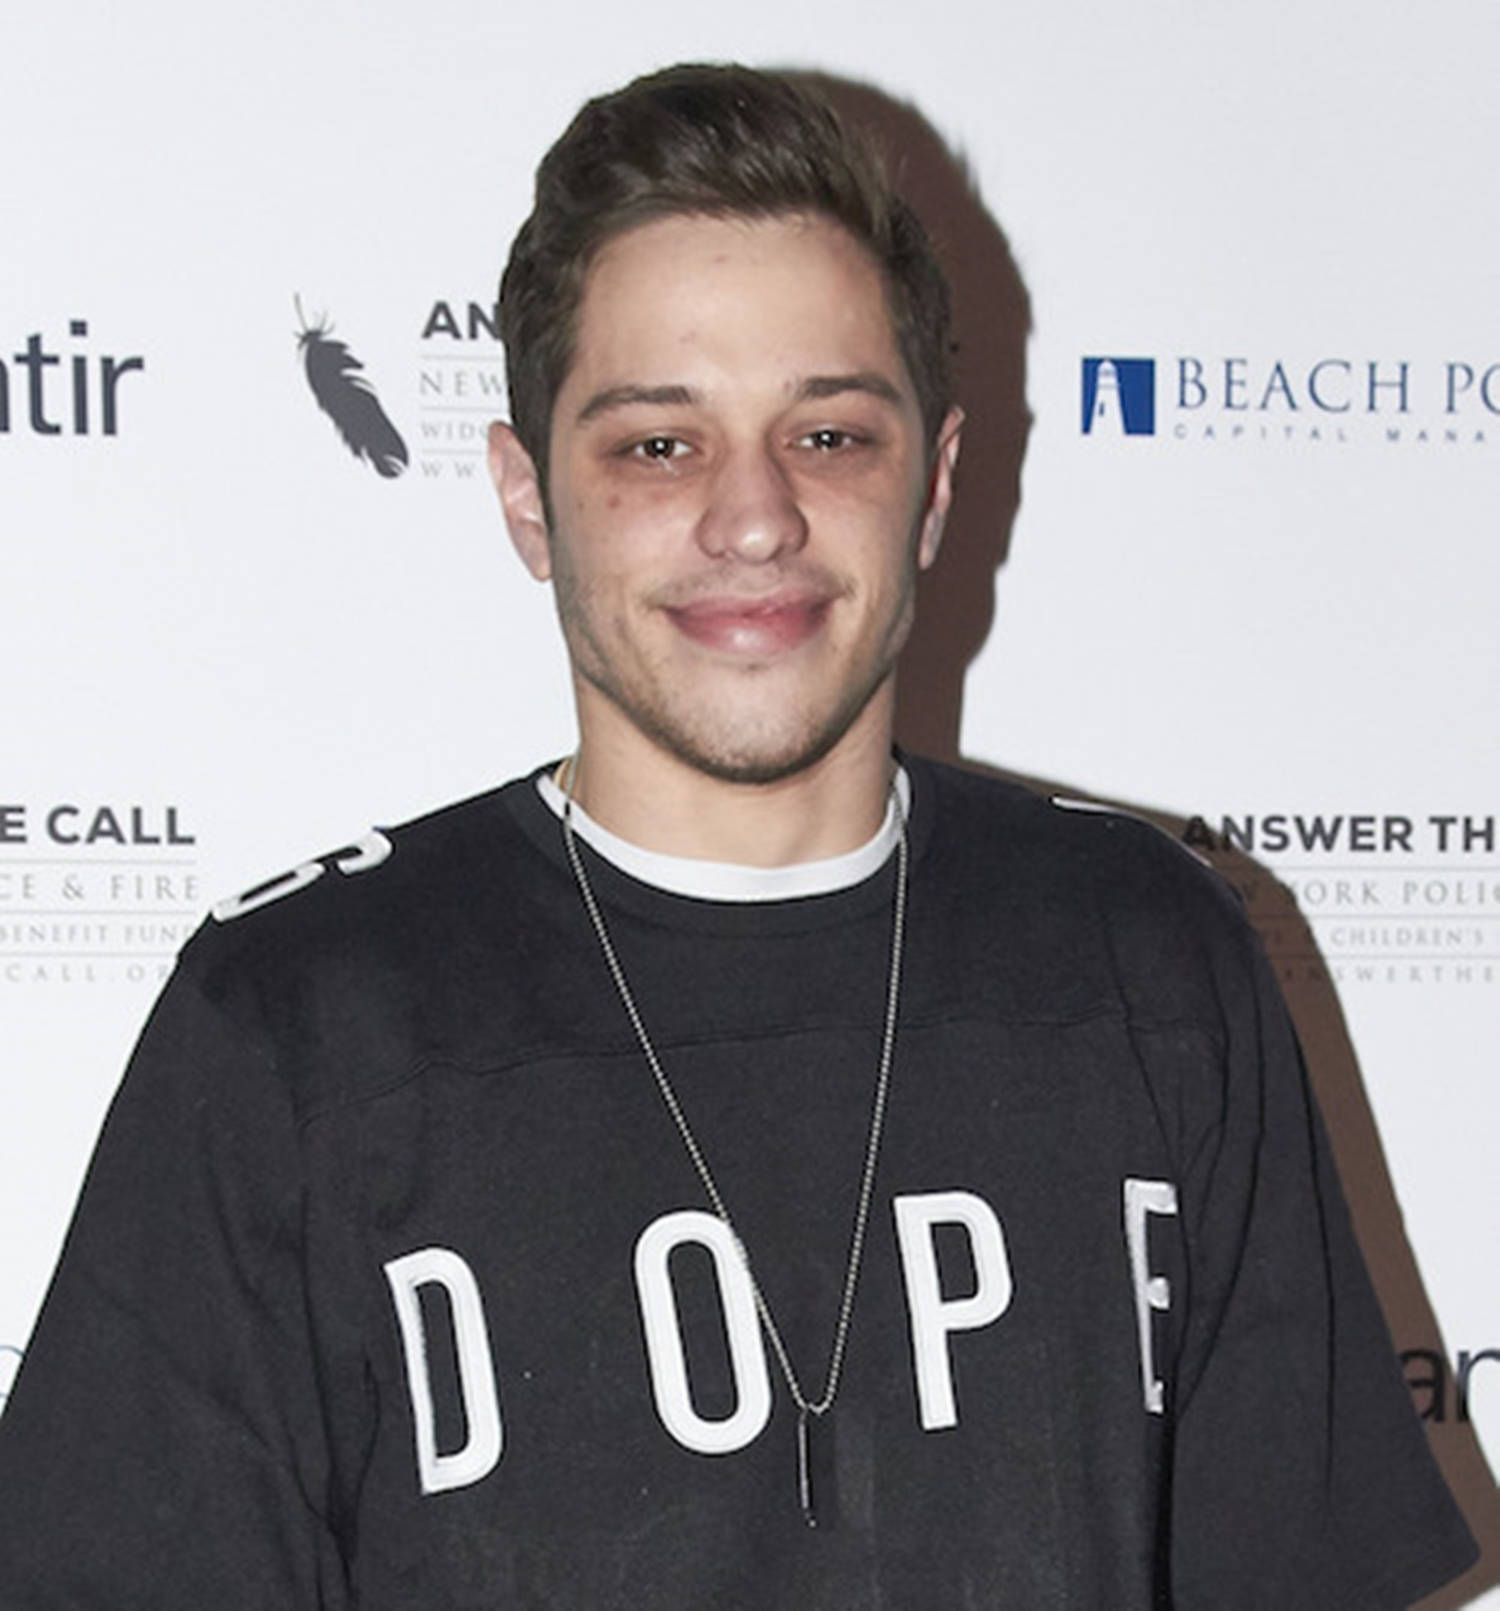 Pete Davidson Answer The Call Event